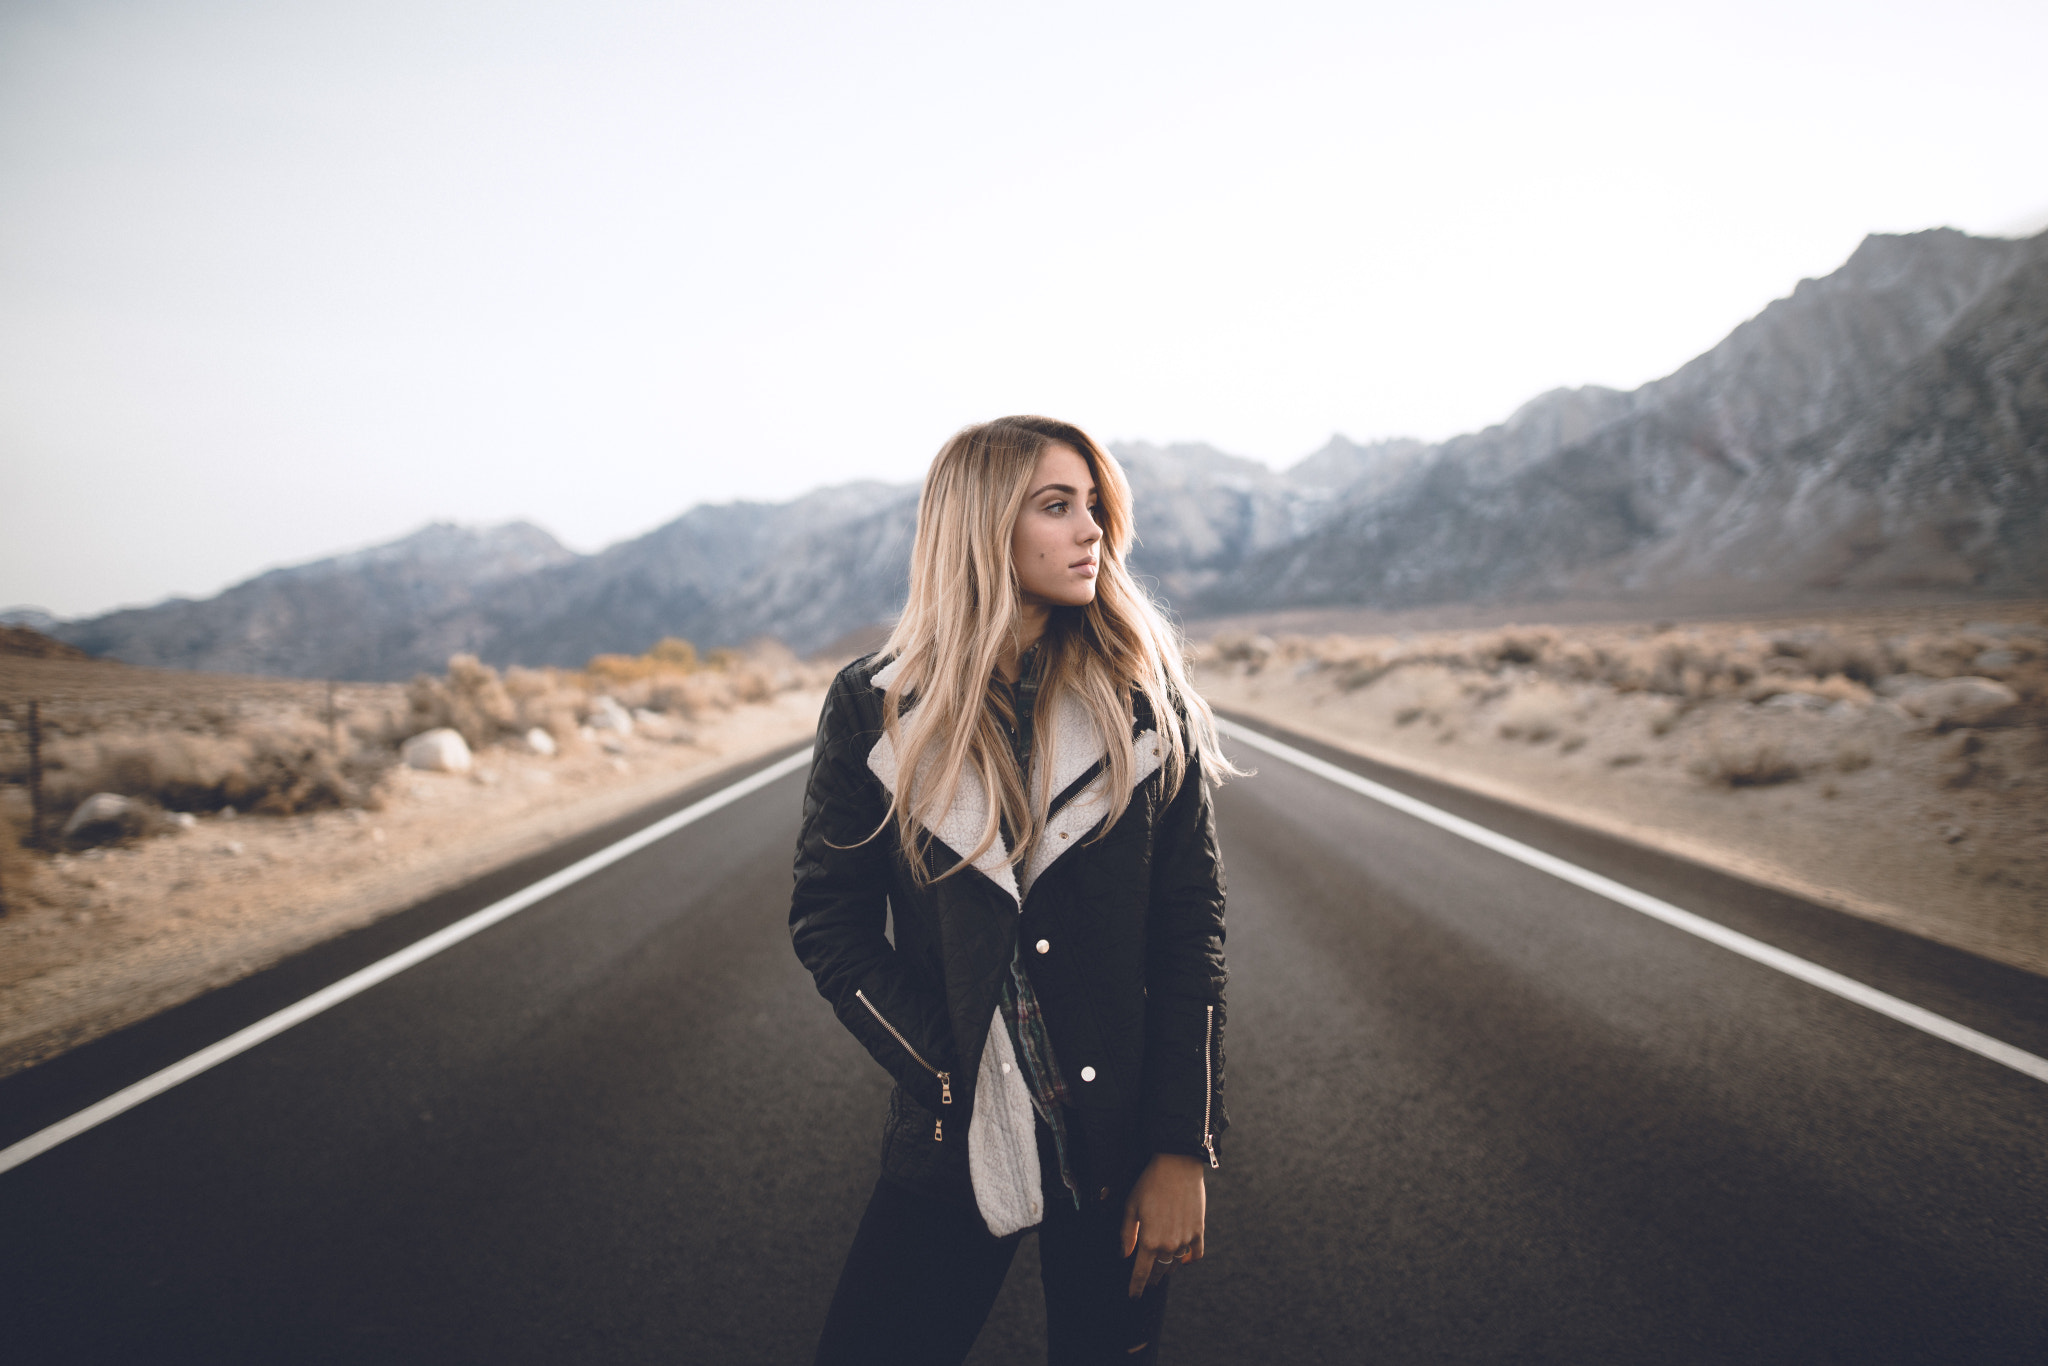 People 2048x1366 women blonde looking into the distance road mountains Zach Allia Charly Jordan jacket long hair women outdoors black jackets standing black pants